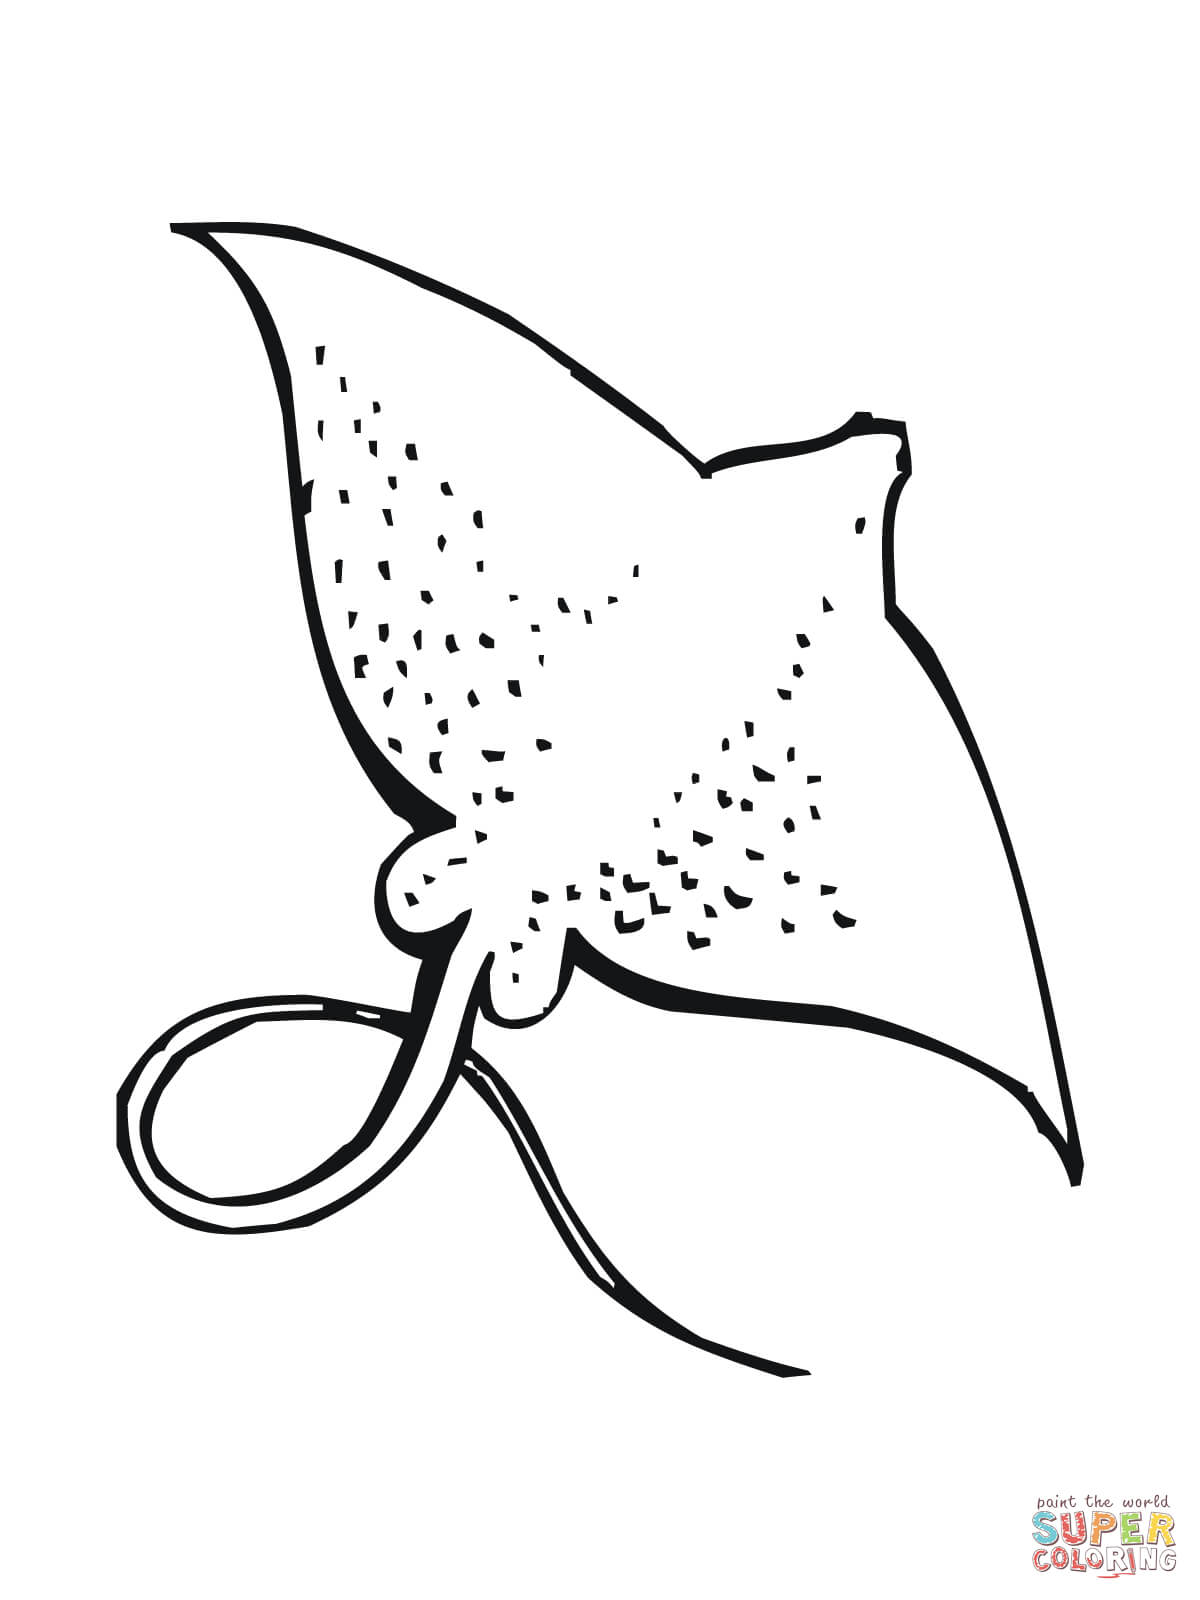 Skate fish coloring page free printable coloring pages